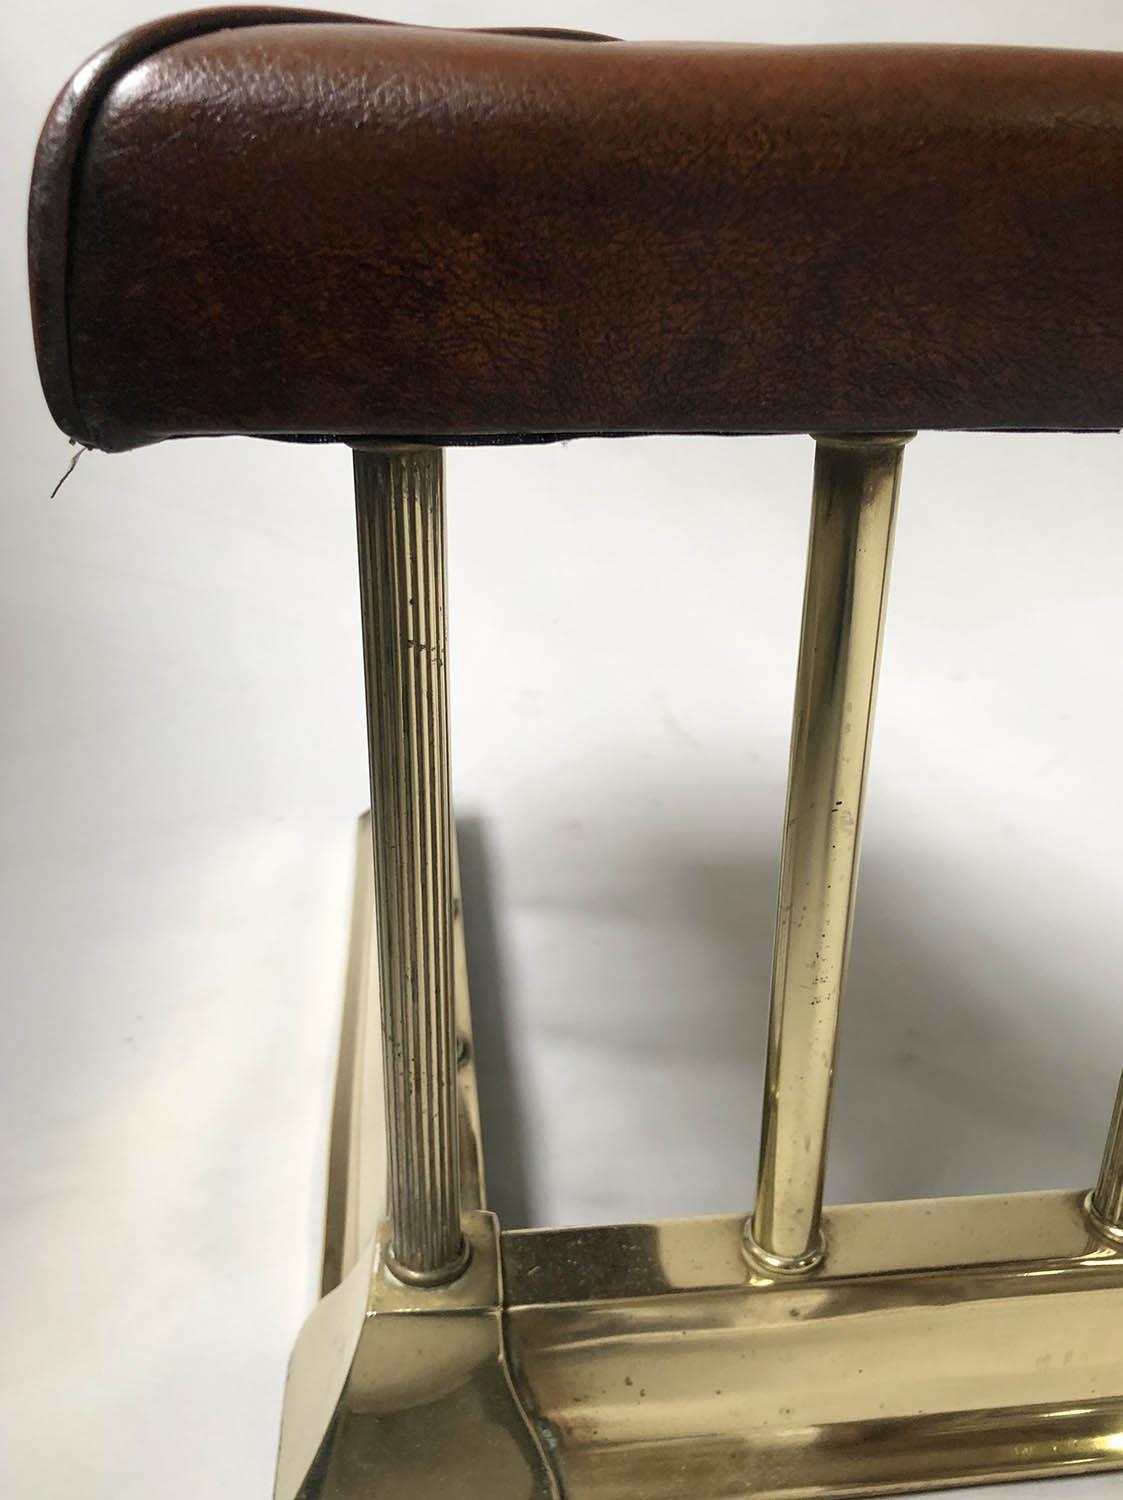 CLUB FENDER, Victorian style brass with buttoned brown leather pads and balustrade support, 140cm - Image 4 of 6